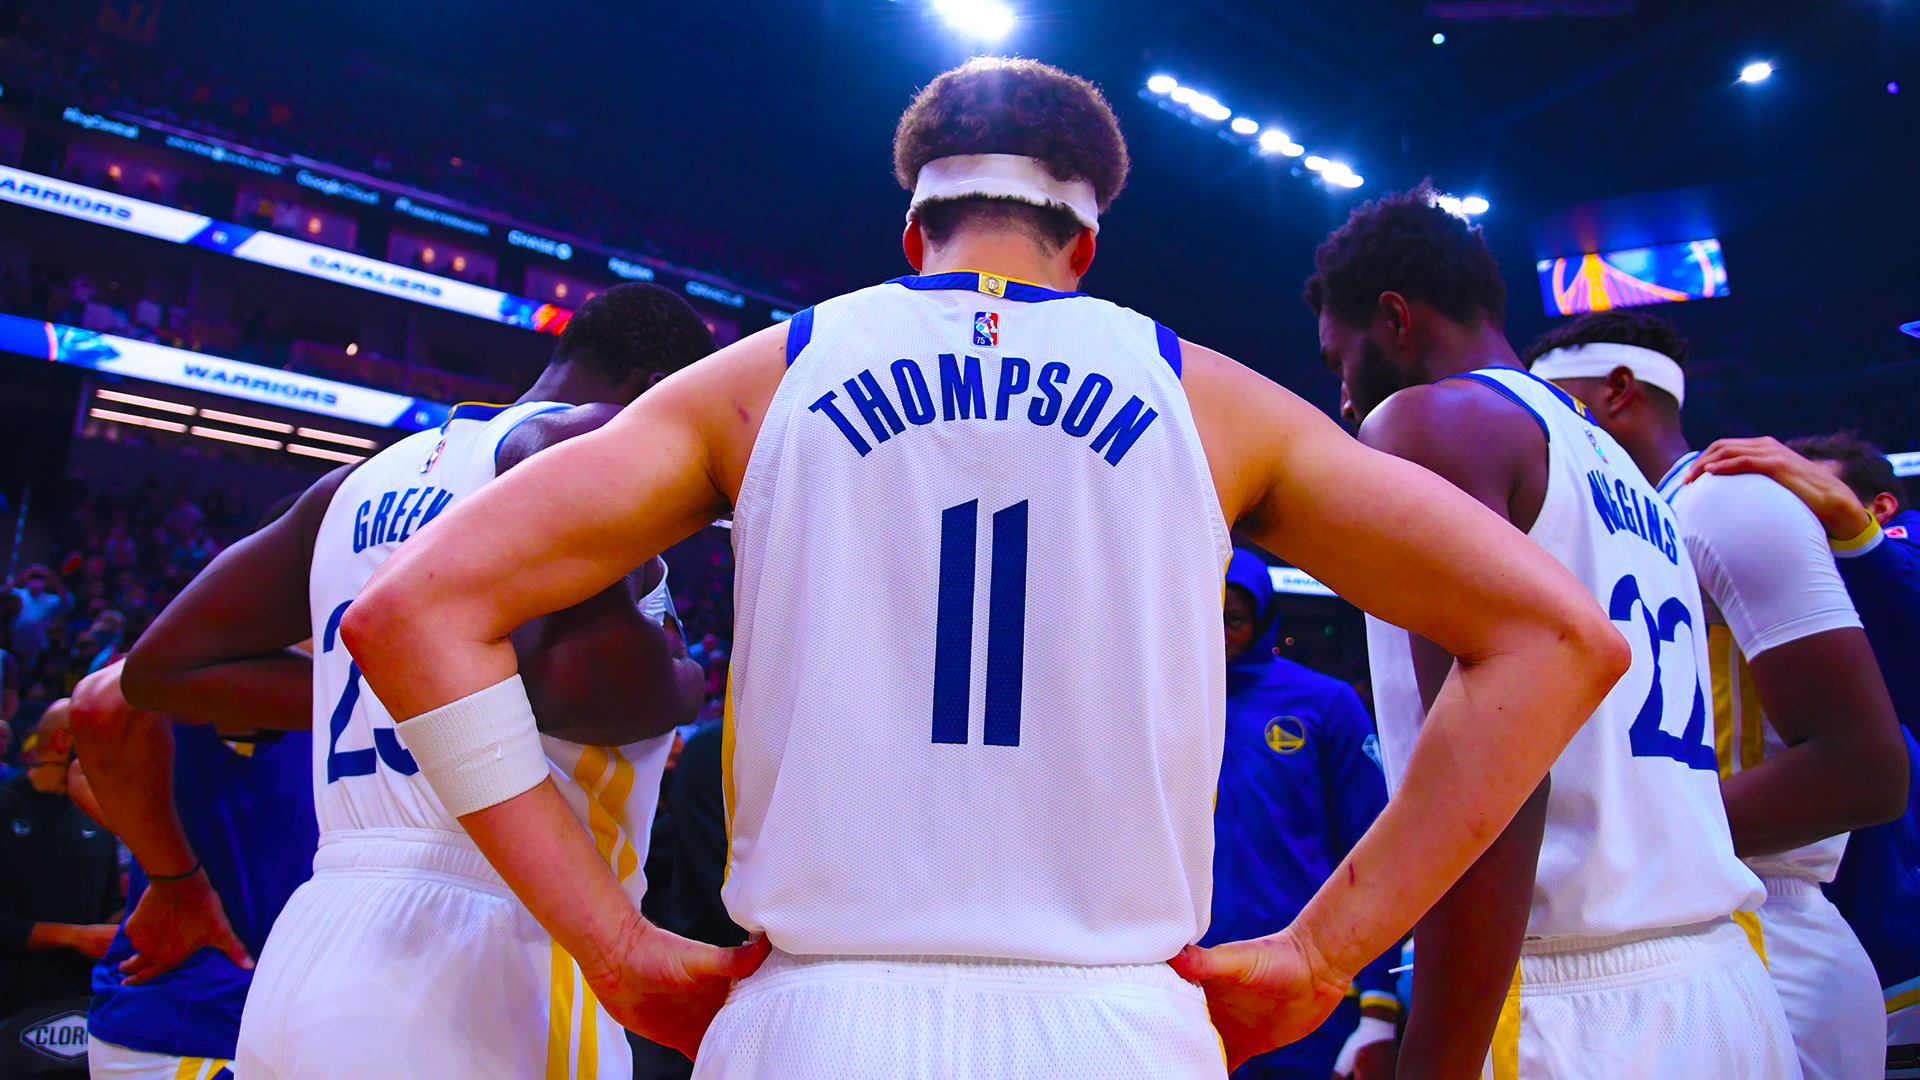 Social media reacts to Klay Thompson's return to the court